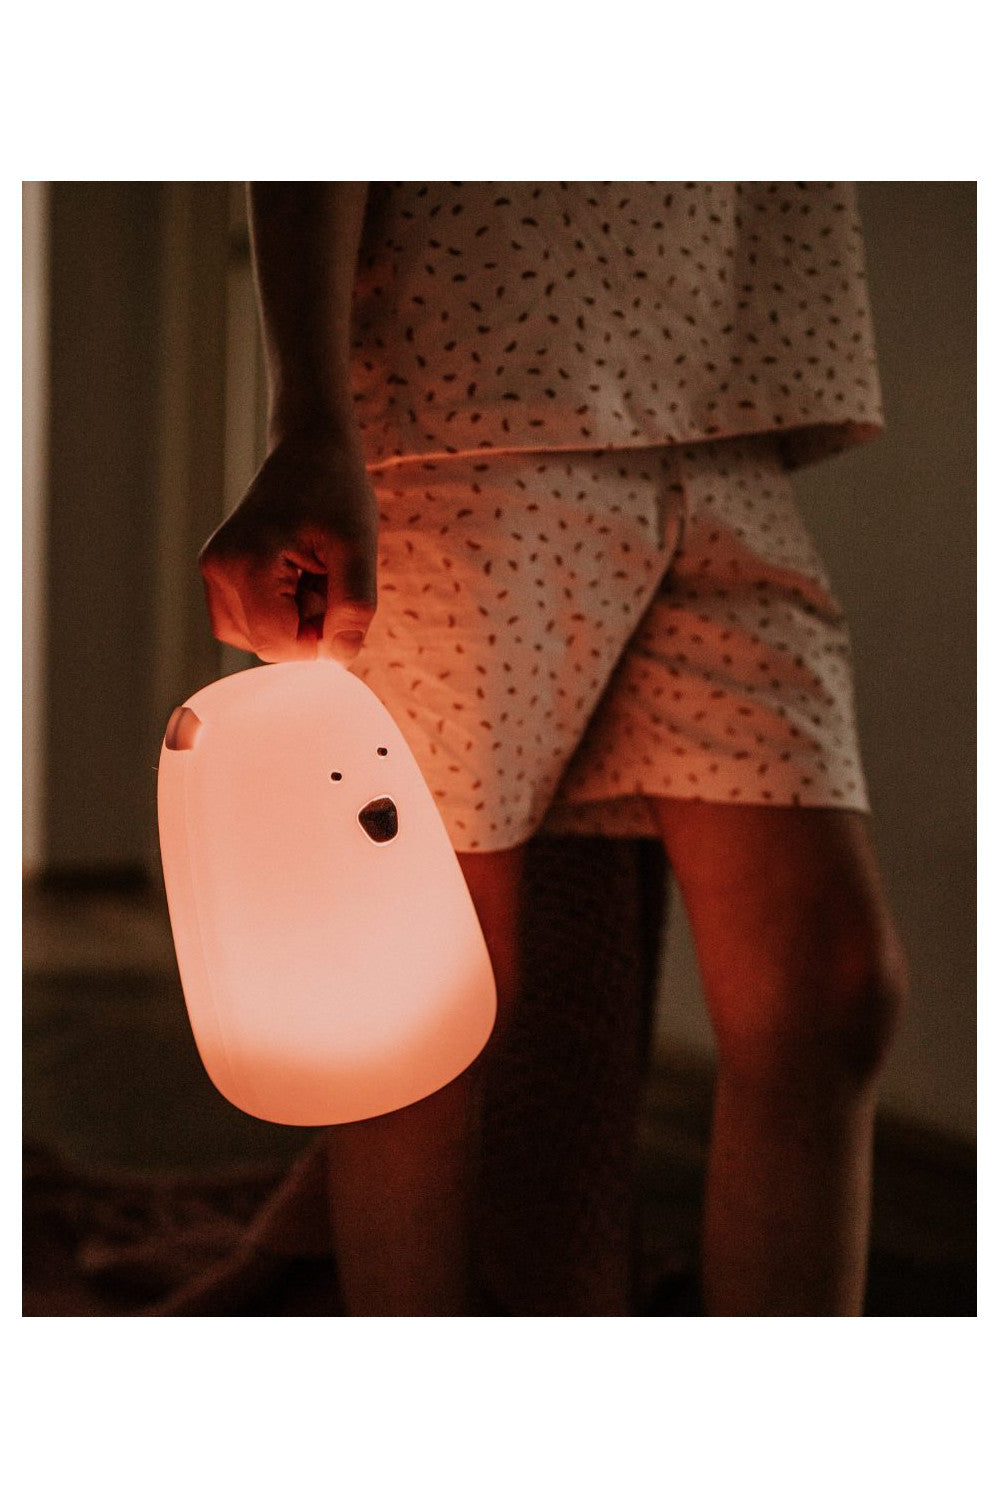 A person holding a pink teddy bear-shaped silicone lamp by Rabbit & Friends, providing comforting light for children's bedtime routines and playtime.